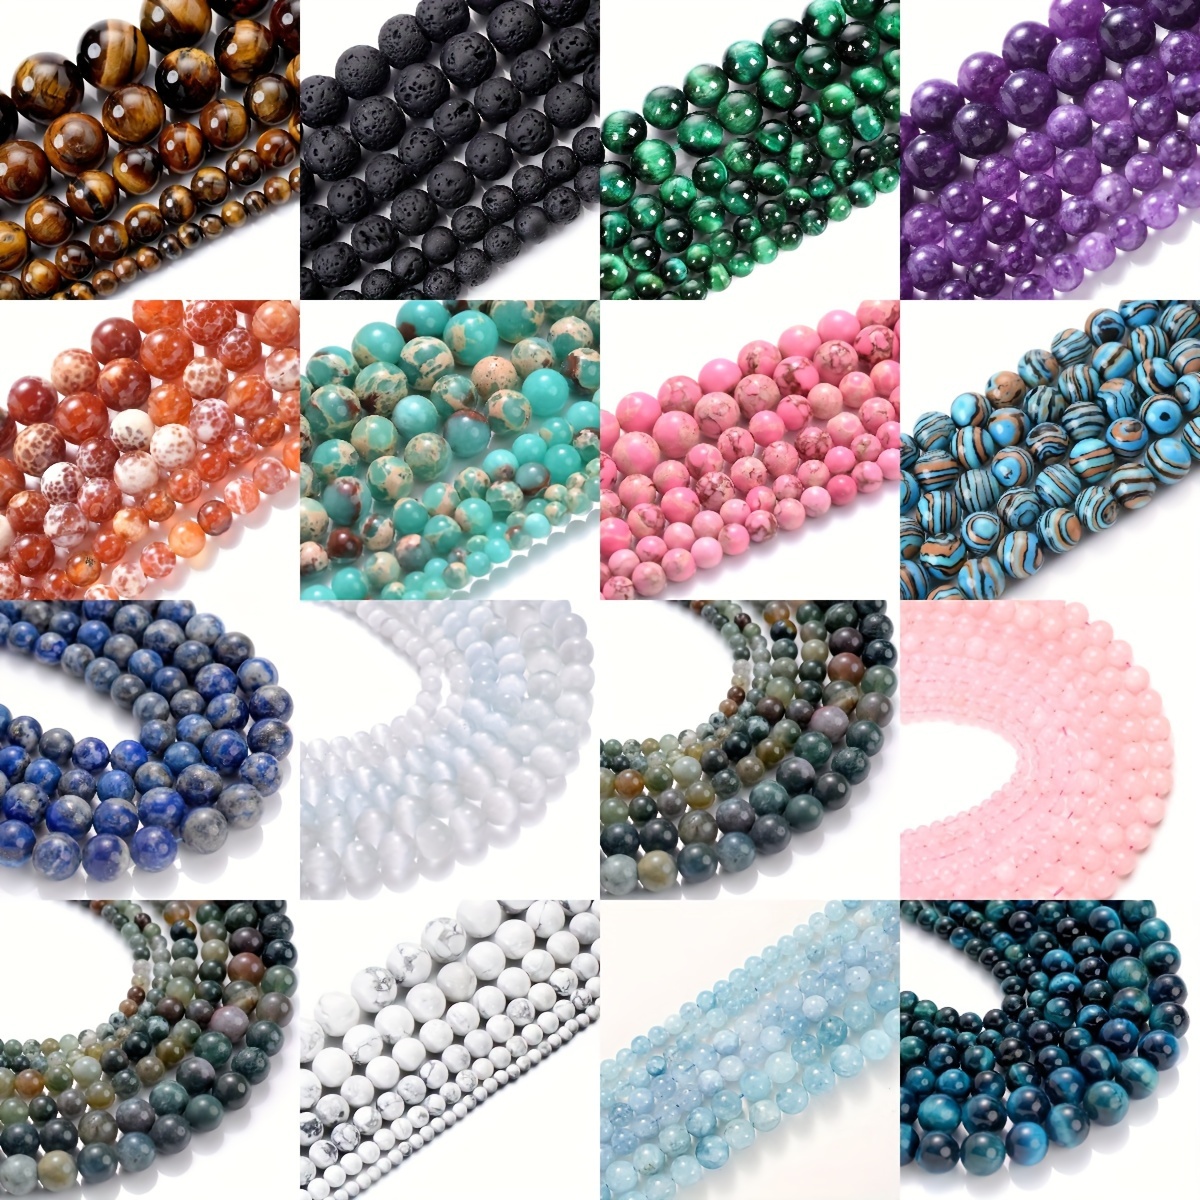 

4-12mm Natural Stone Beads Tiger Eye Lava Agates Malachite Amethyst Beads For Jewelry Making Diy Bracelet Necklace Accessories